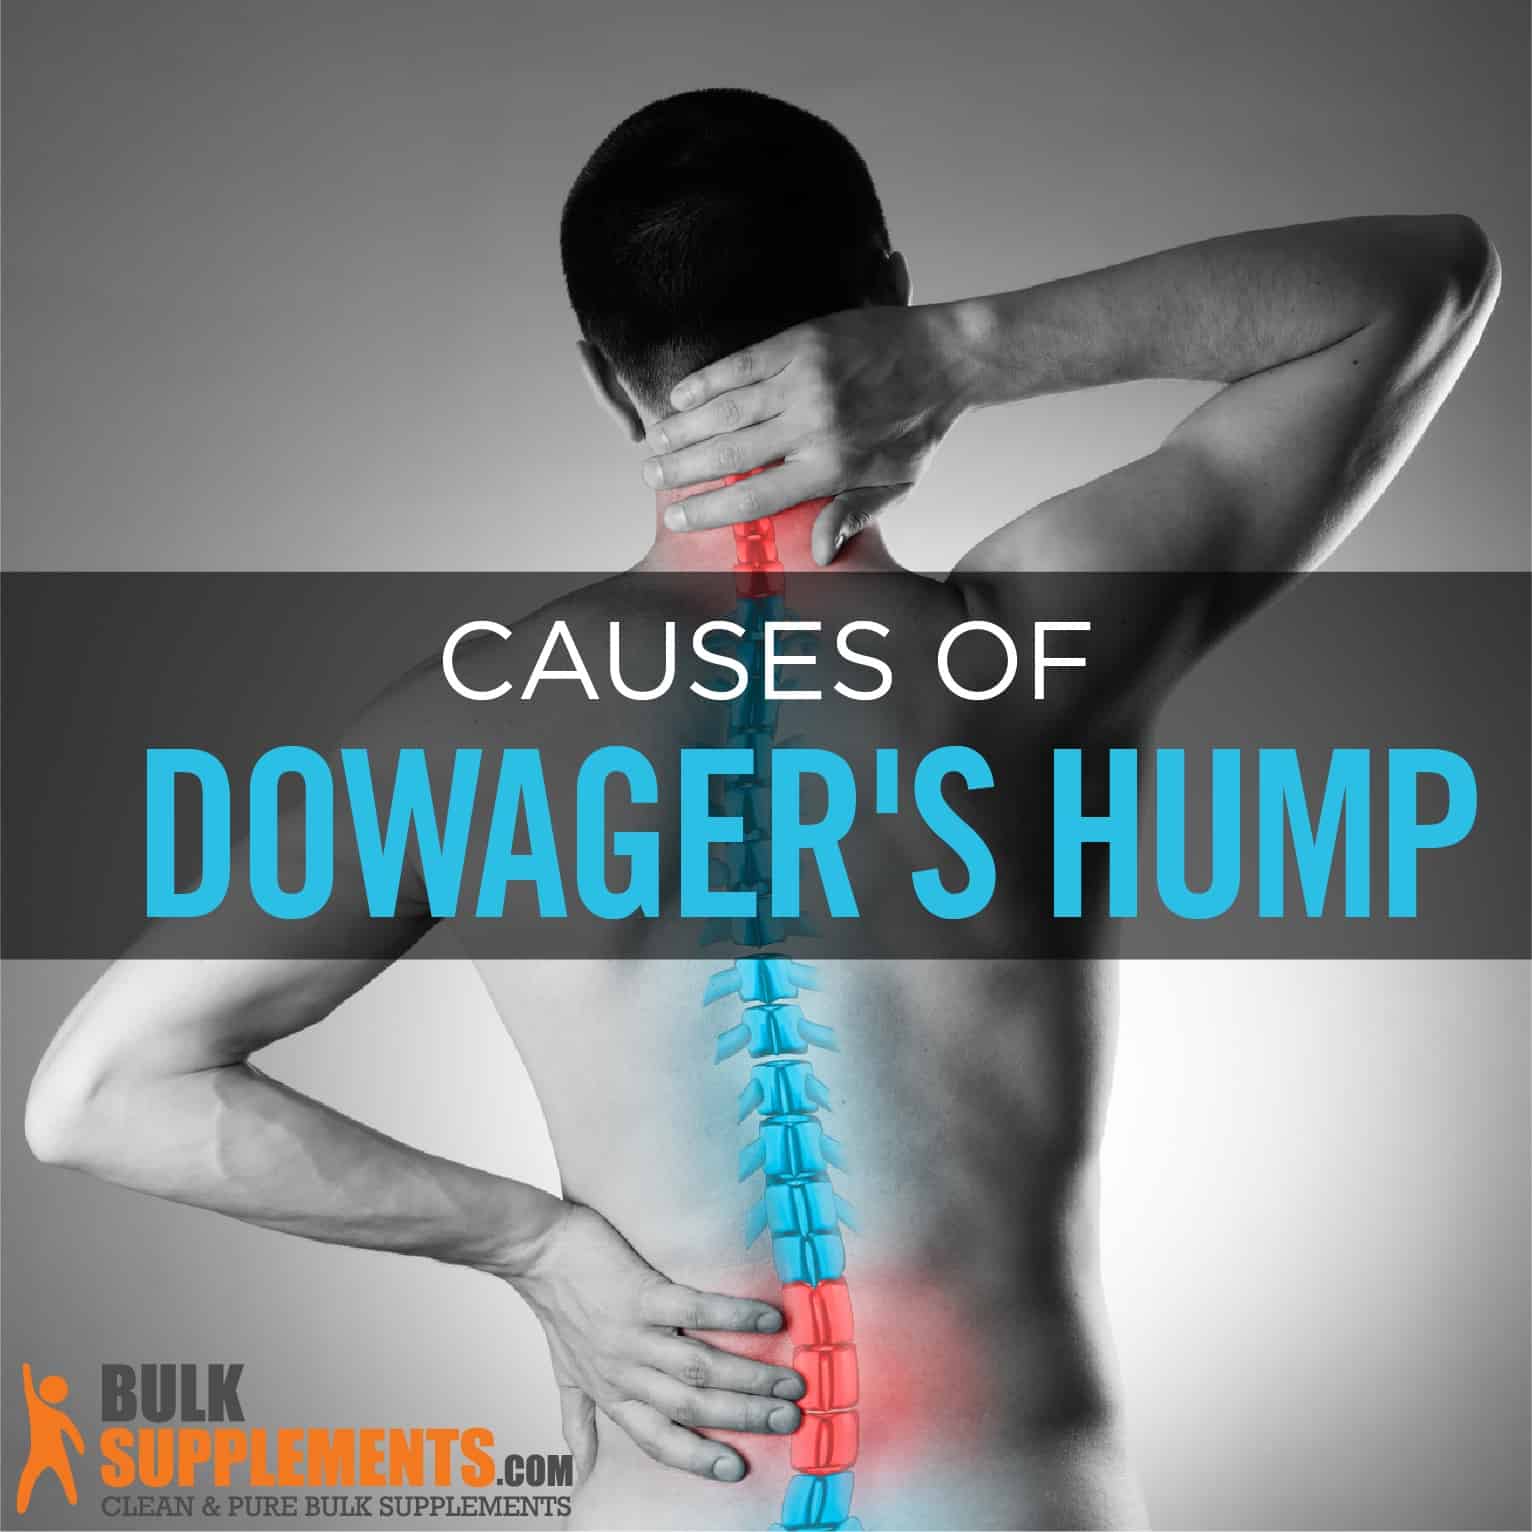 Understanding Dowager's Hump: Causes, Symptoms, And Risk Factors